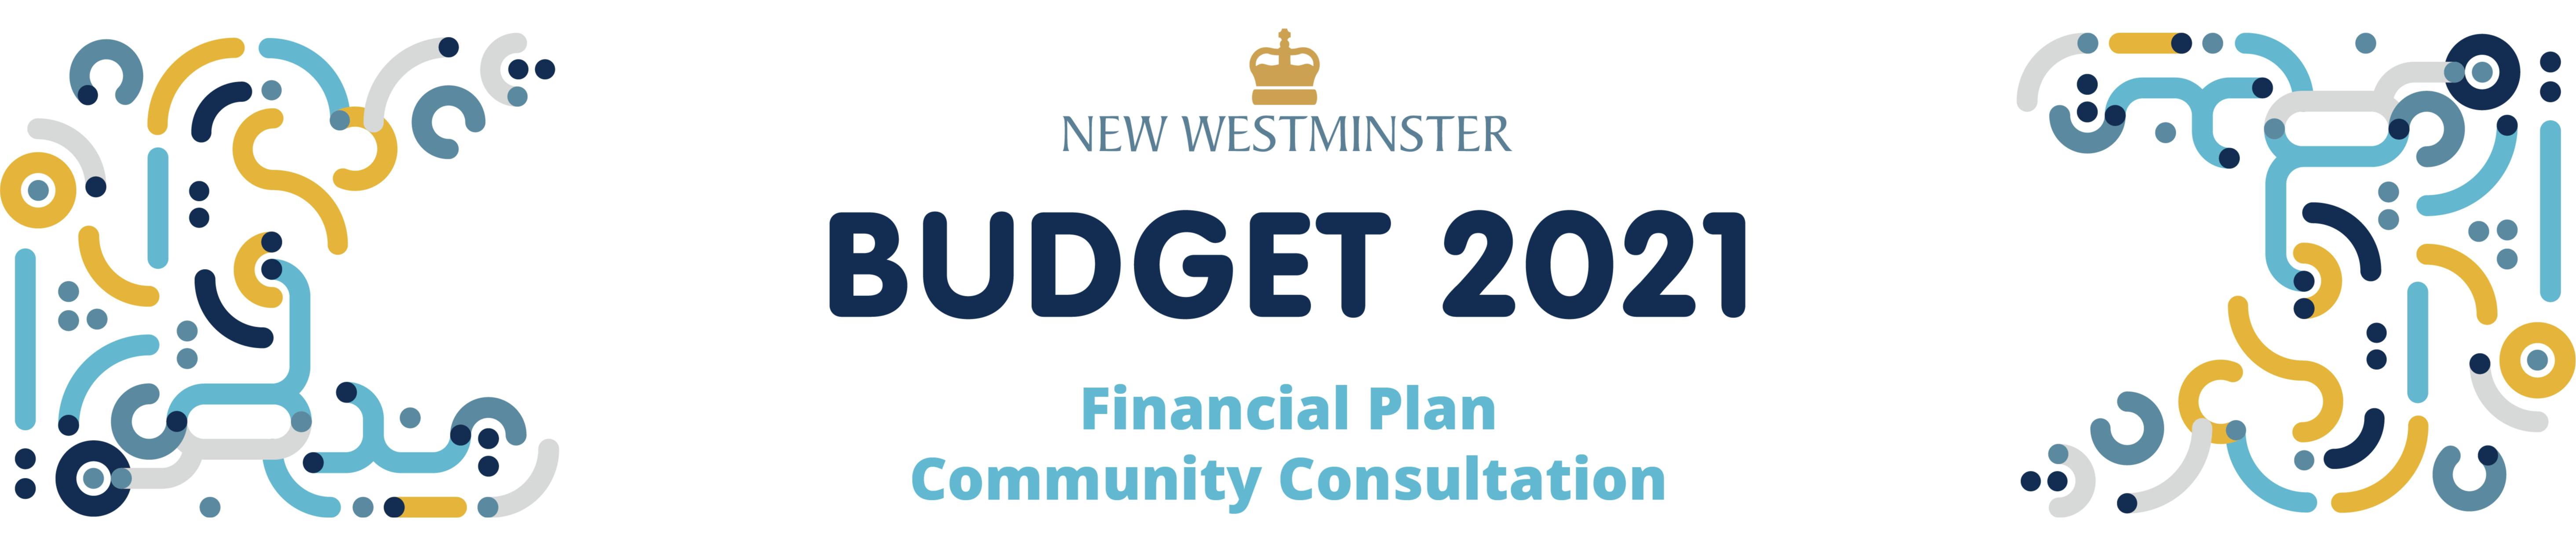 Graphic with text New Westminster Budget 2021 Financial Plan Community Consultation